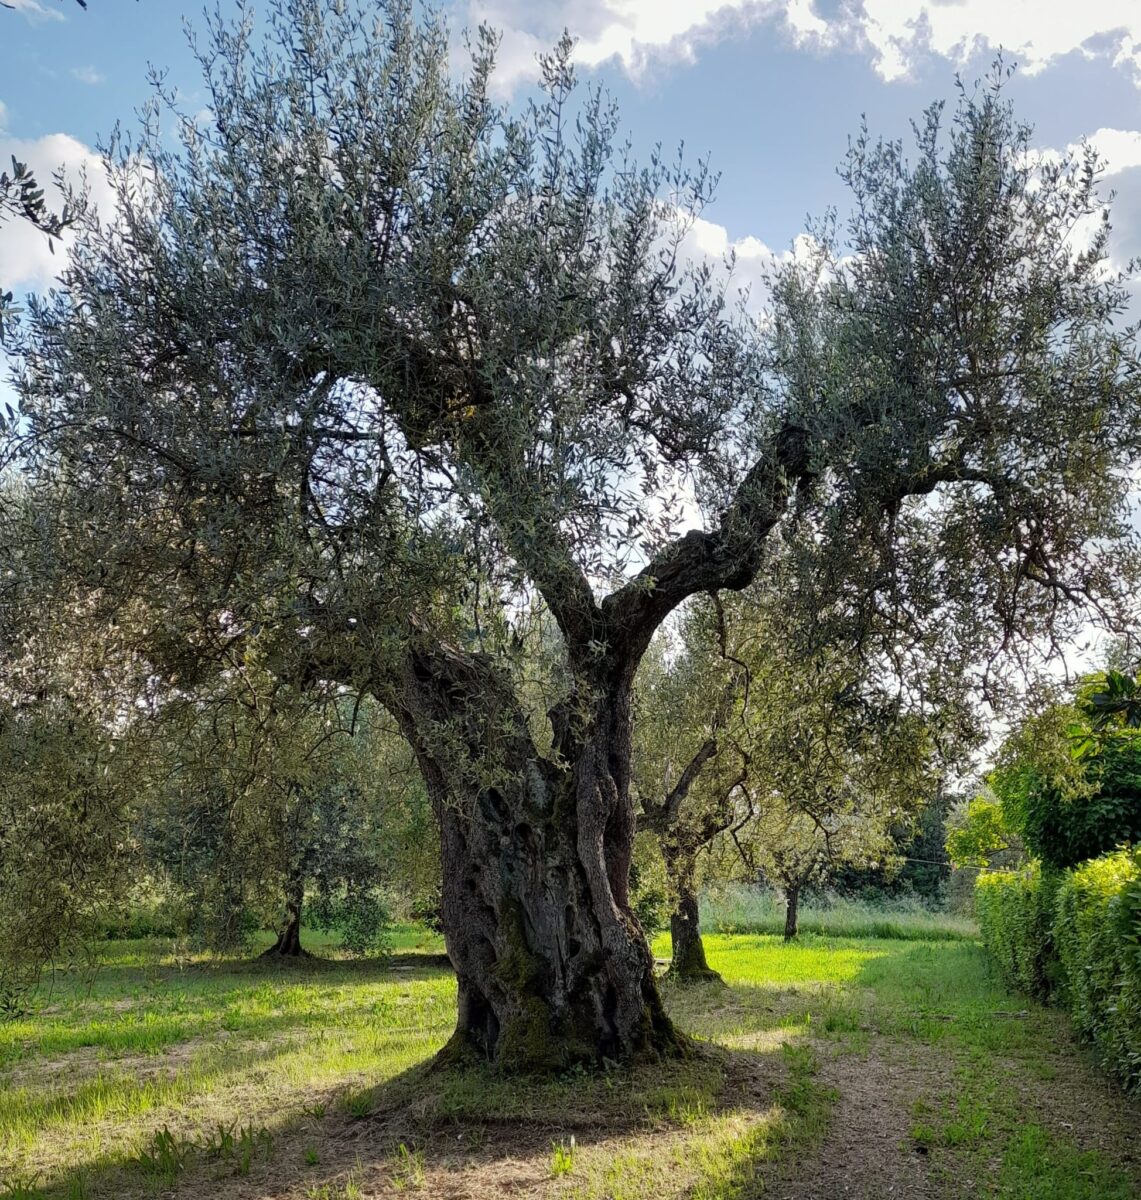 From under the olive tree